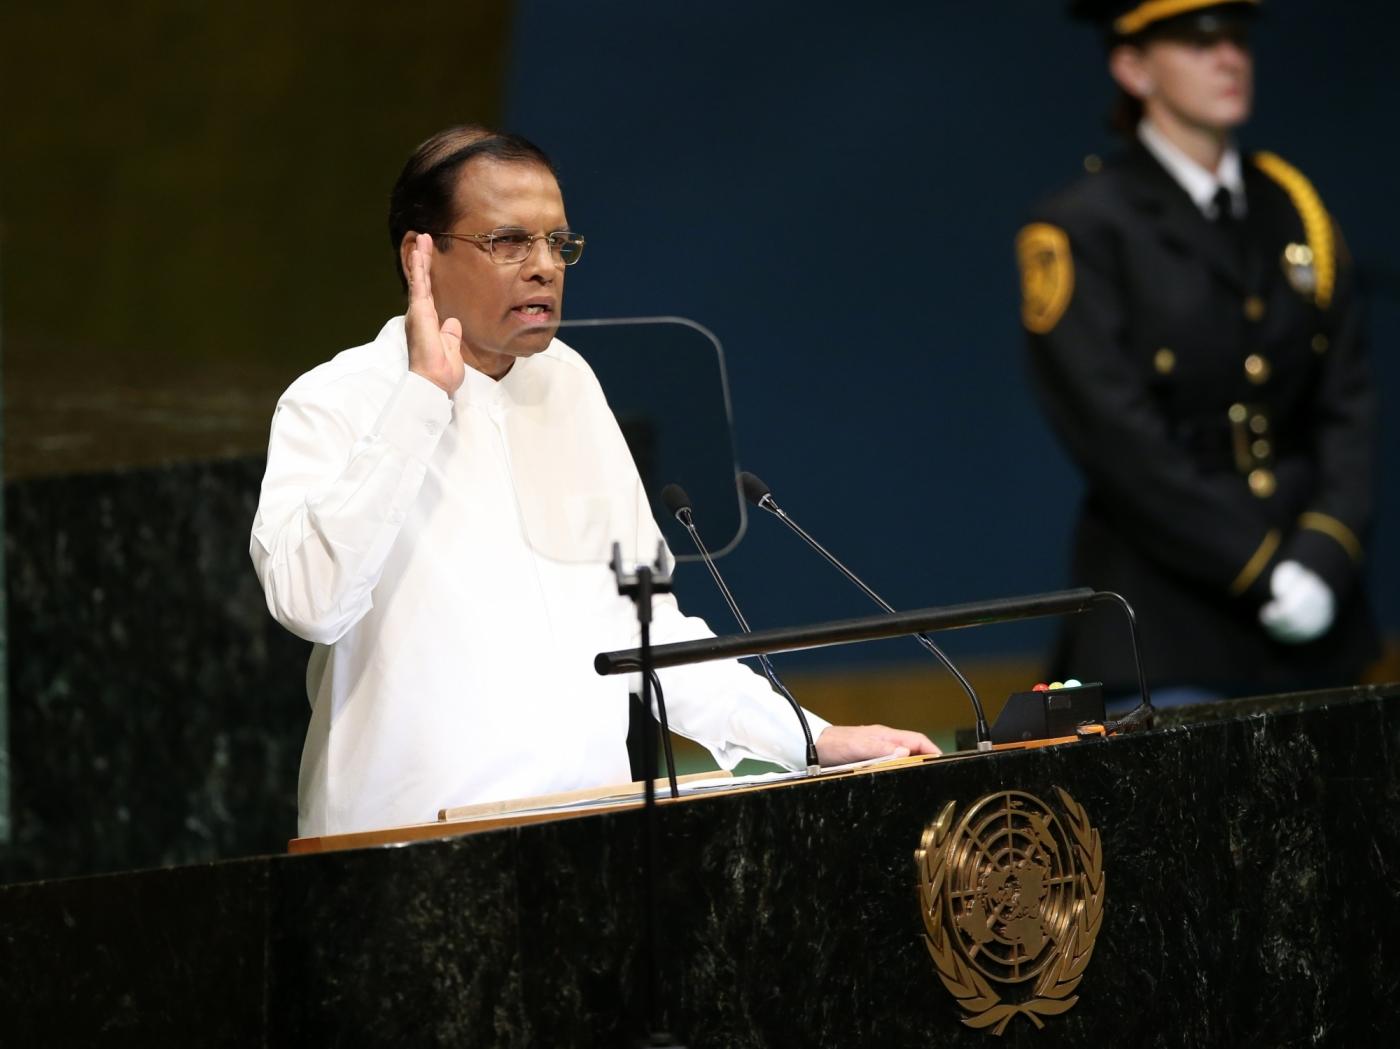 UNITED NATIONS, Sept. 25, 2018 (Xinhua) -- Sri Lankan President Maithripala Sirisena (Front) addresses the General Debate of the 73rd session of the United Nations General Assembly at the UN headquarters in New York, on Sept. 25, 2018. (Xinhua/Qin Lang/IANS) by .